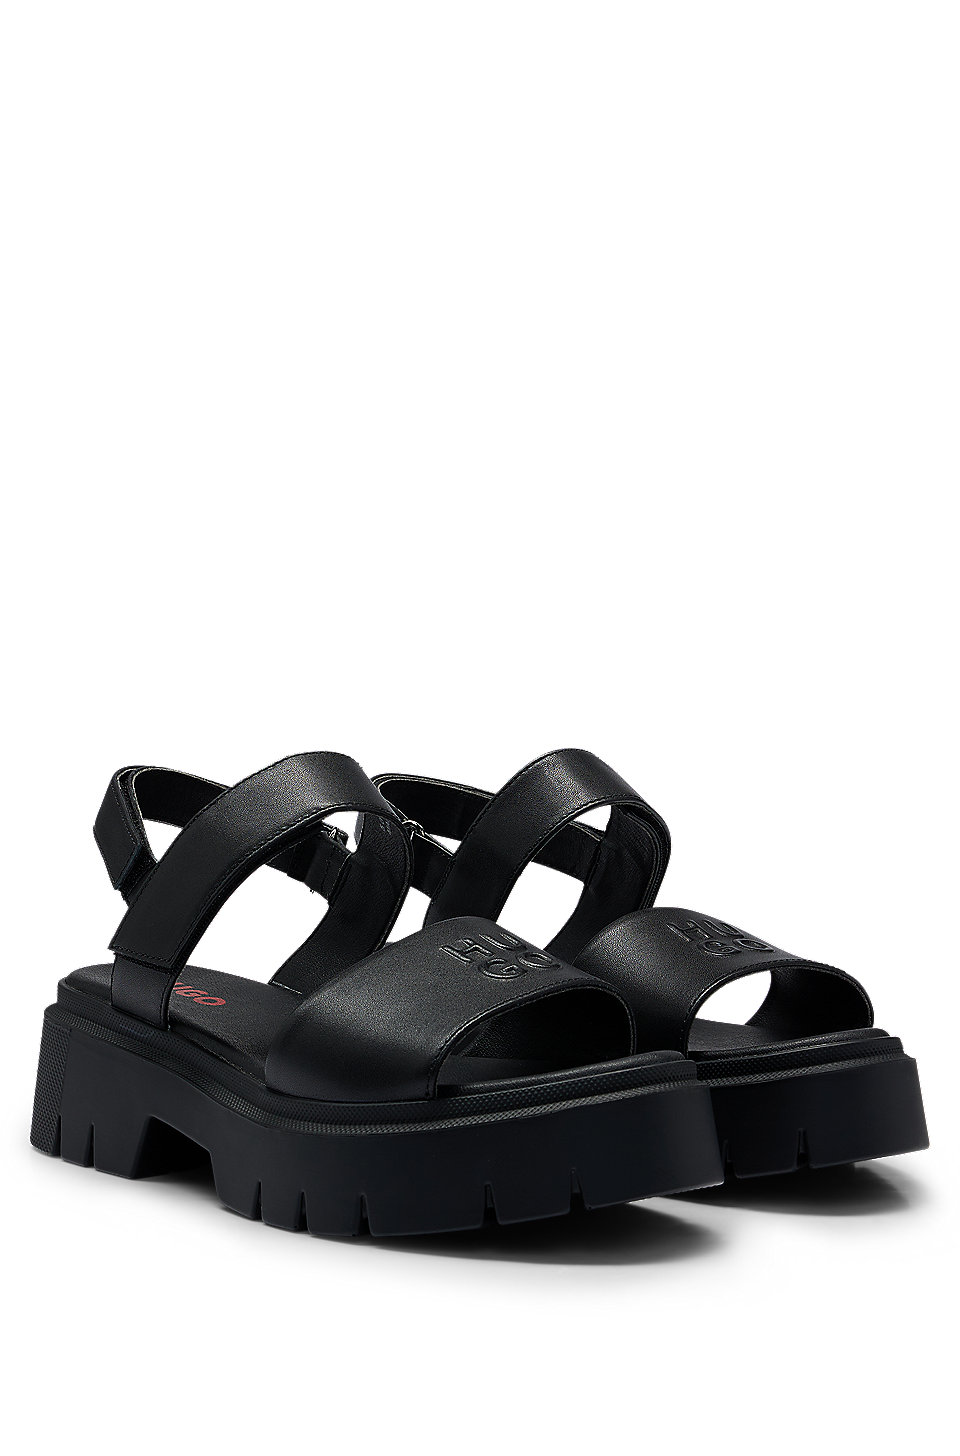 HUGO - Leather sandals with stacked logo